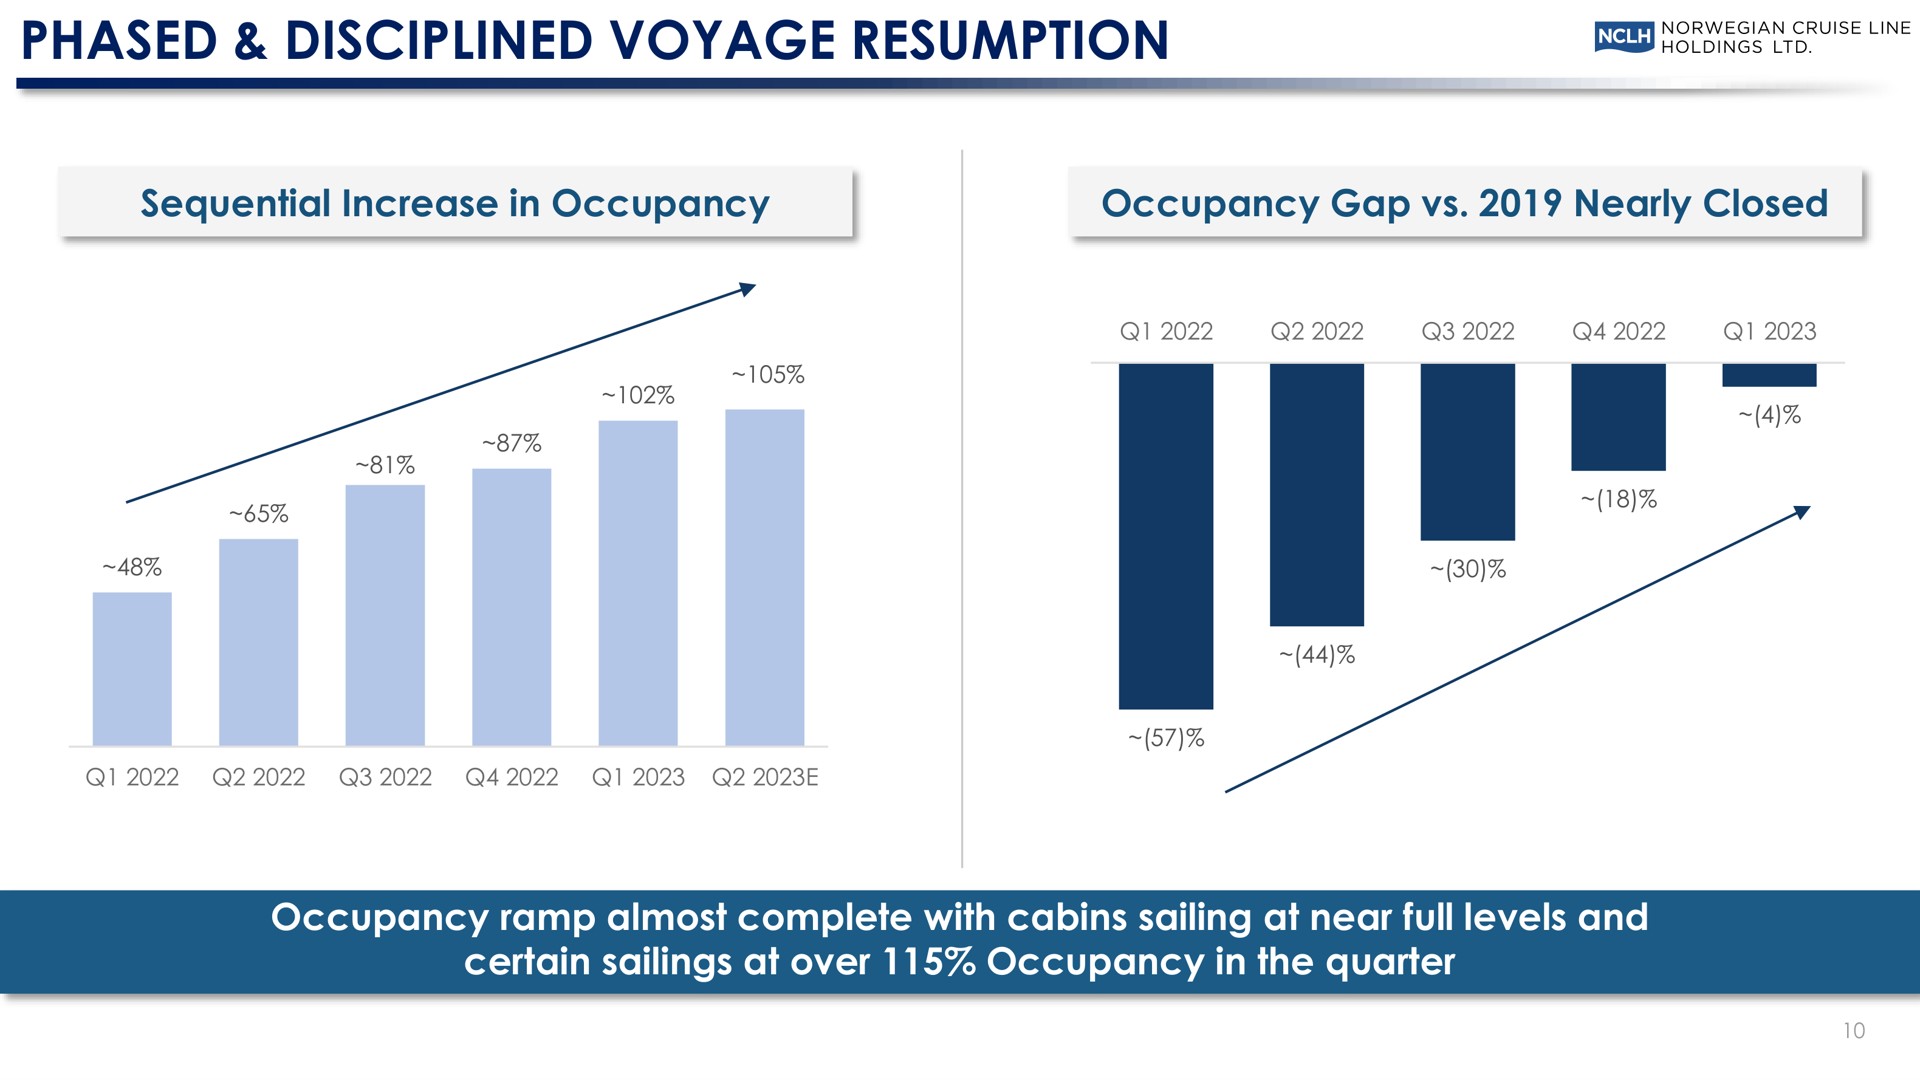 phased disciplined voyage resumption sequential increase in occupancy occupancy gap nearly closed occupancy ramp almost complete with cabins sailing at near full levels and certain sailings at over occupancy in the quarter red | Norwegian Cruise Line